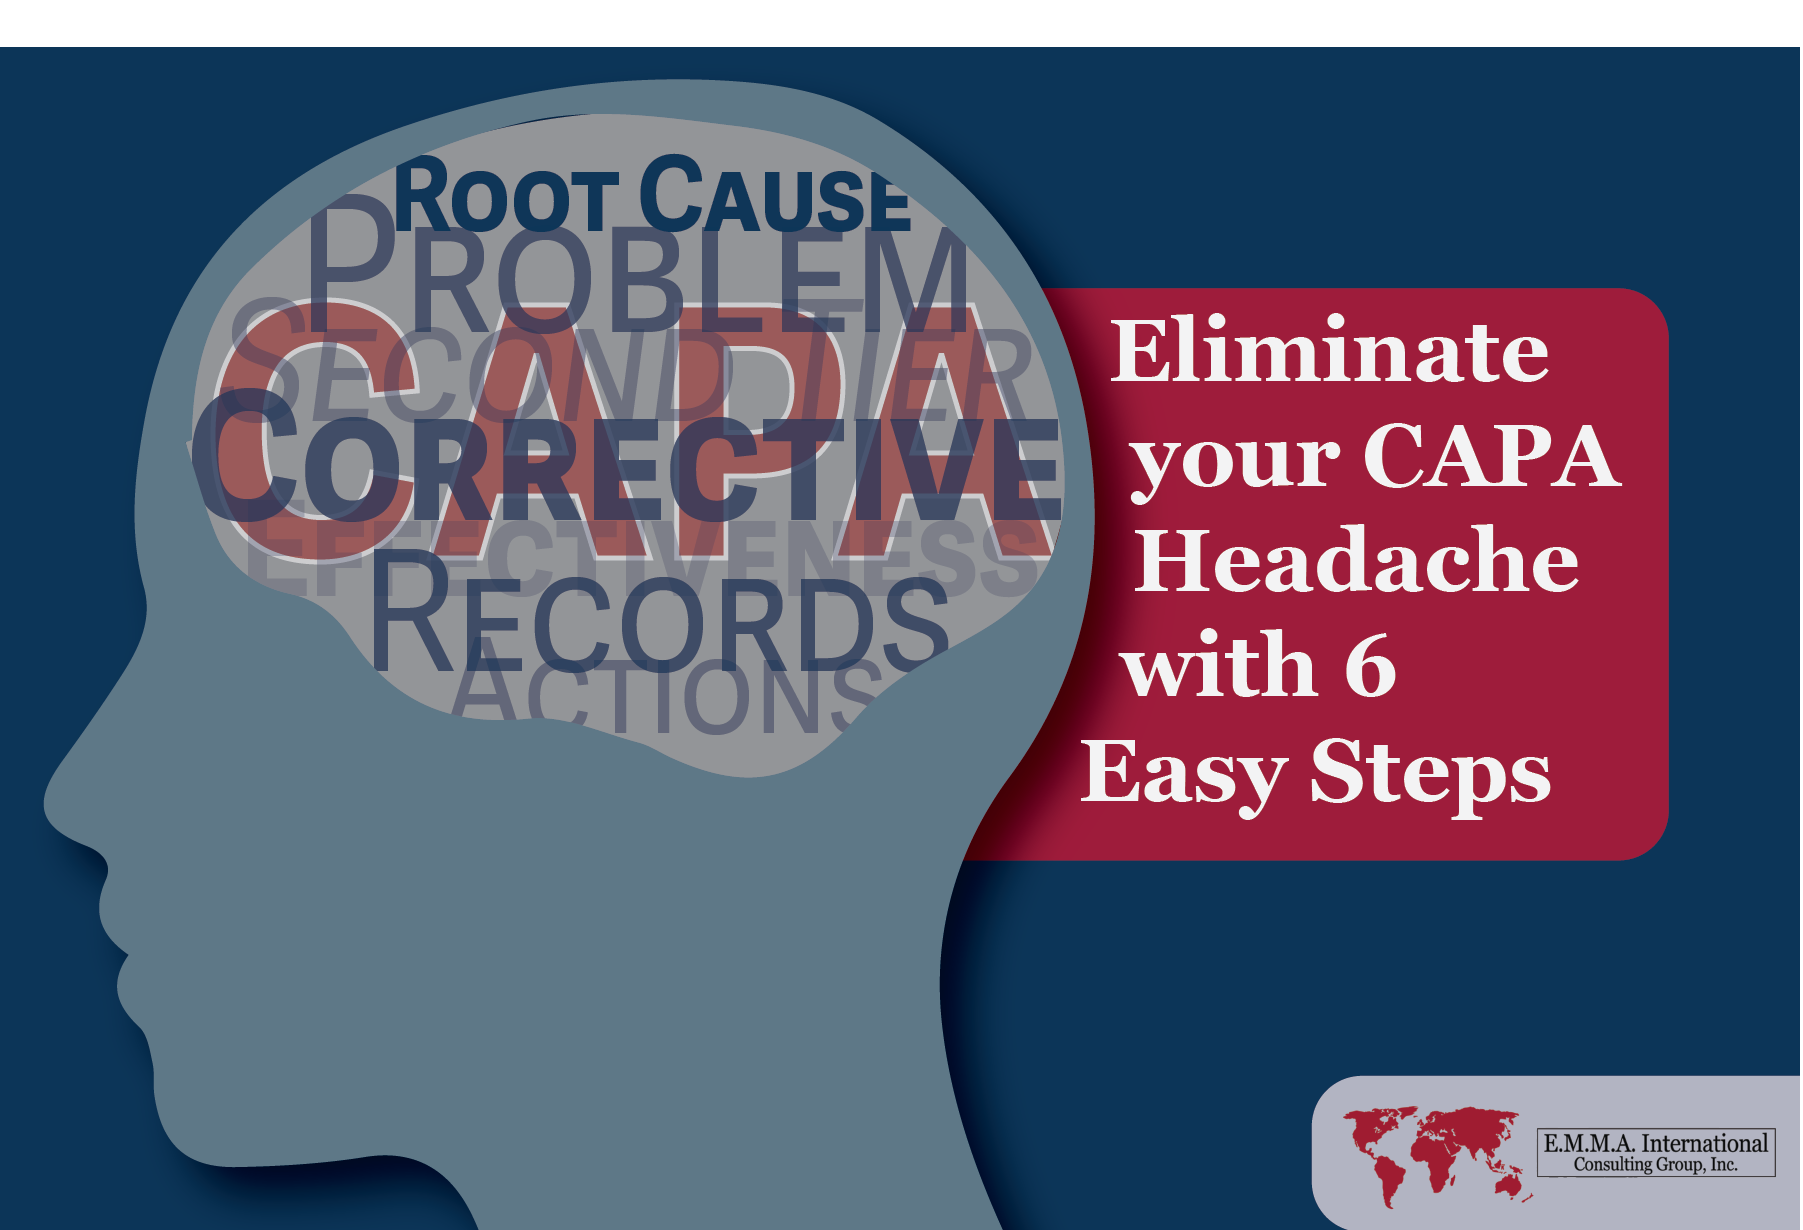 Eliminate your CAPA Headache with 6 Easy Steps